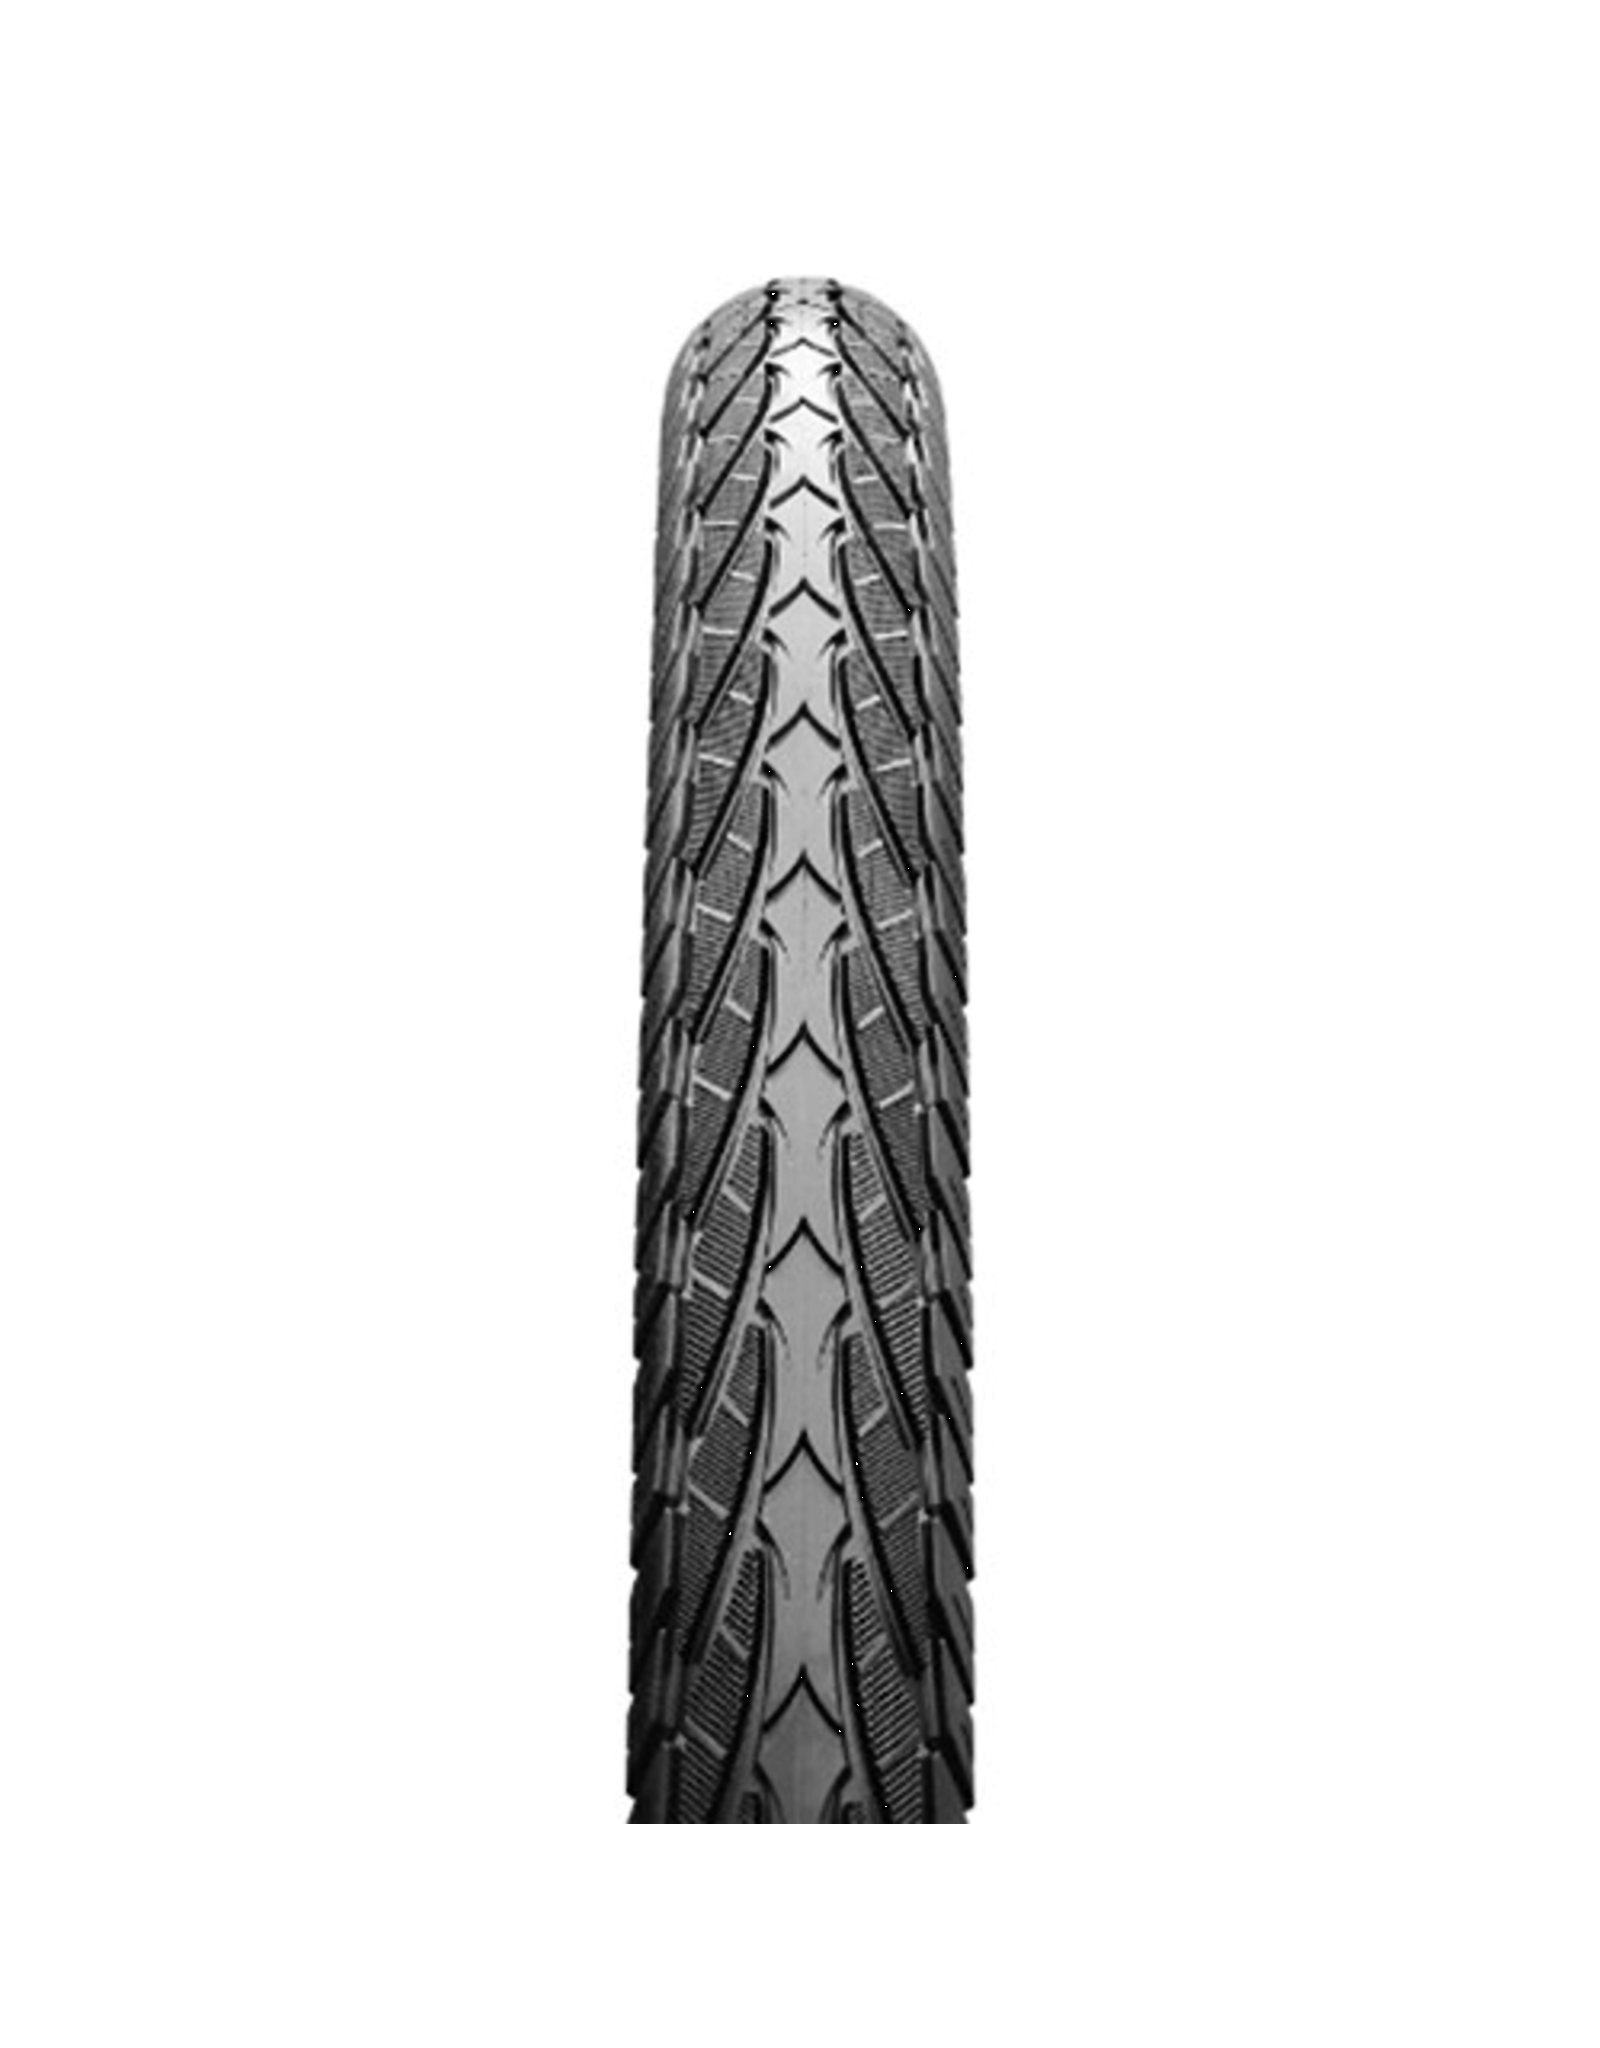 MAXXIS MAXXIS OVERDRIVE 27.5 X 1.65 SILKWORM WIRE 60 TPI TYRE